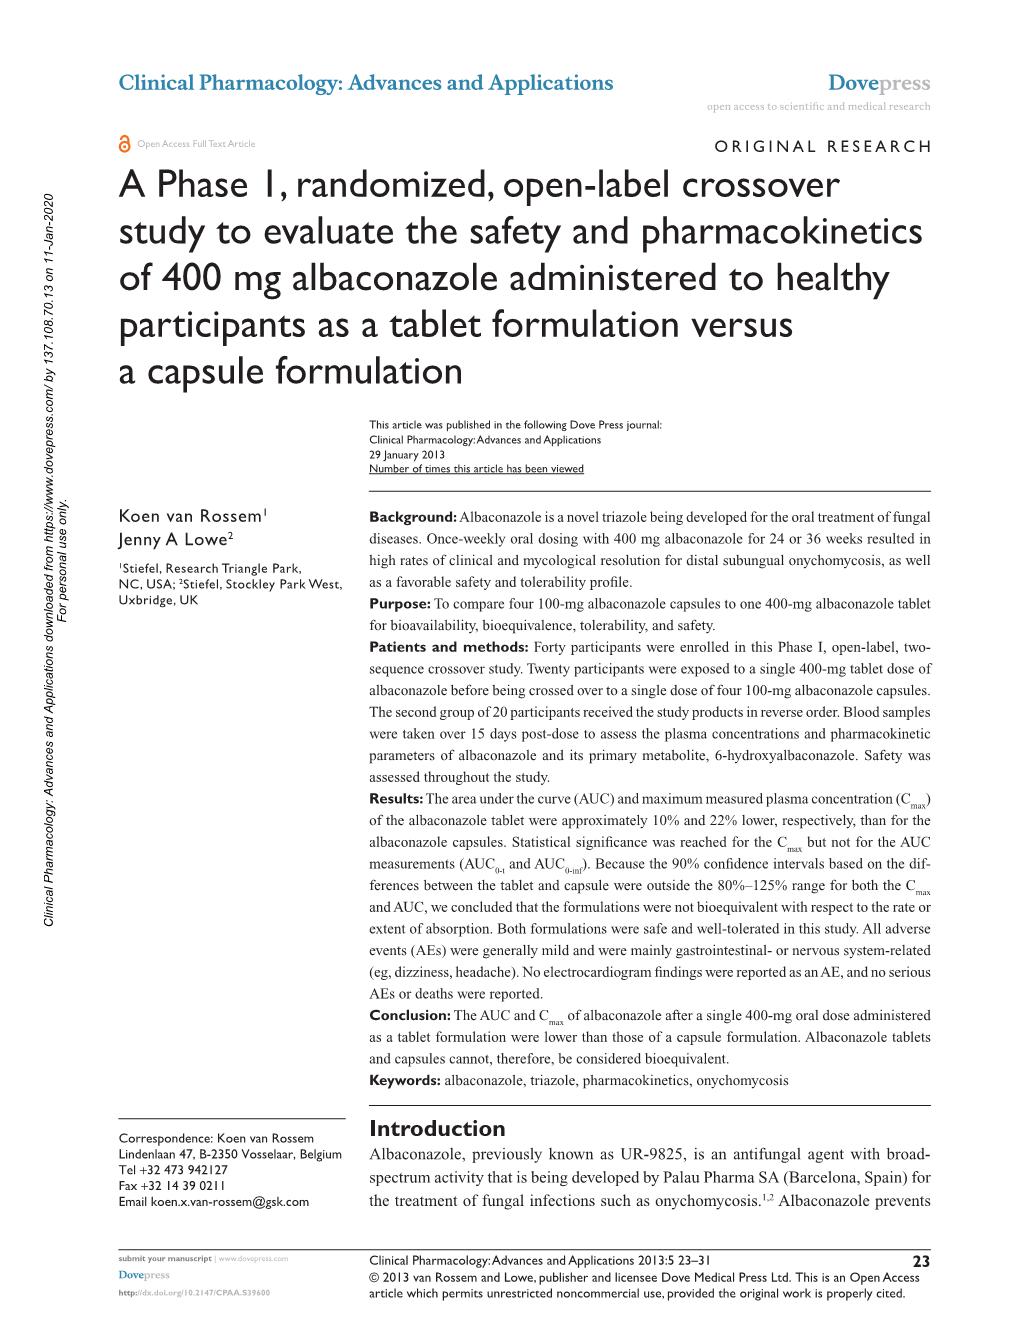 A Phase 1, Randomized, Open-Label Crossover Study to Evaluate The